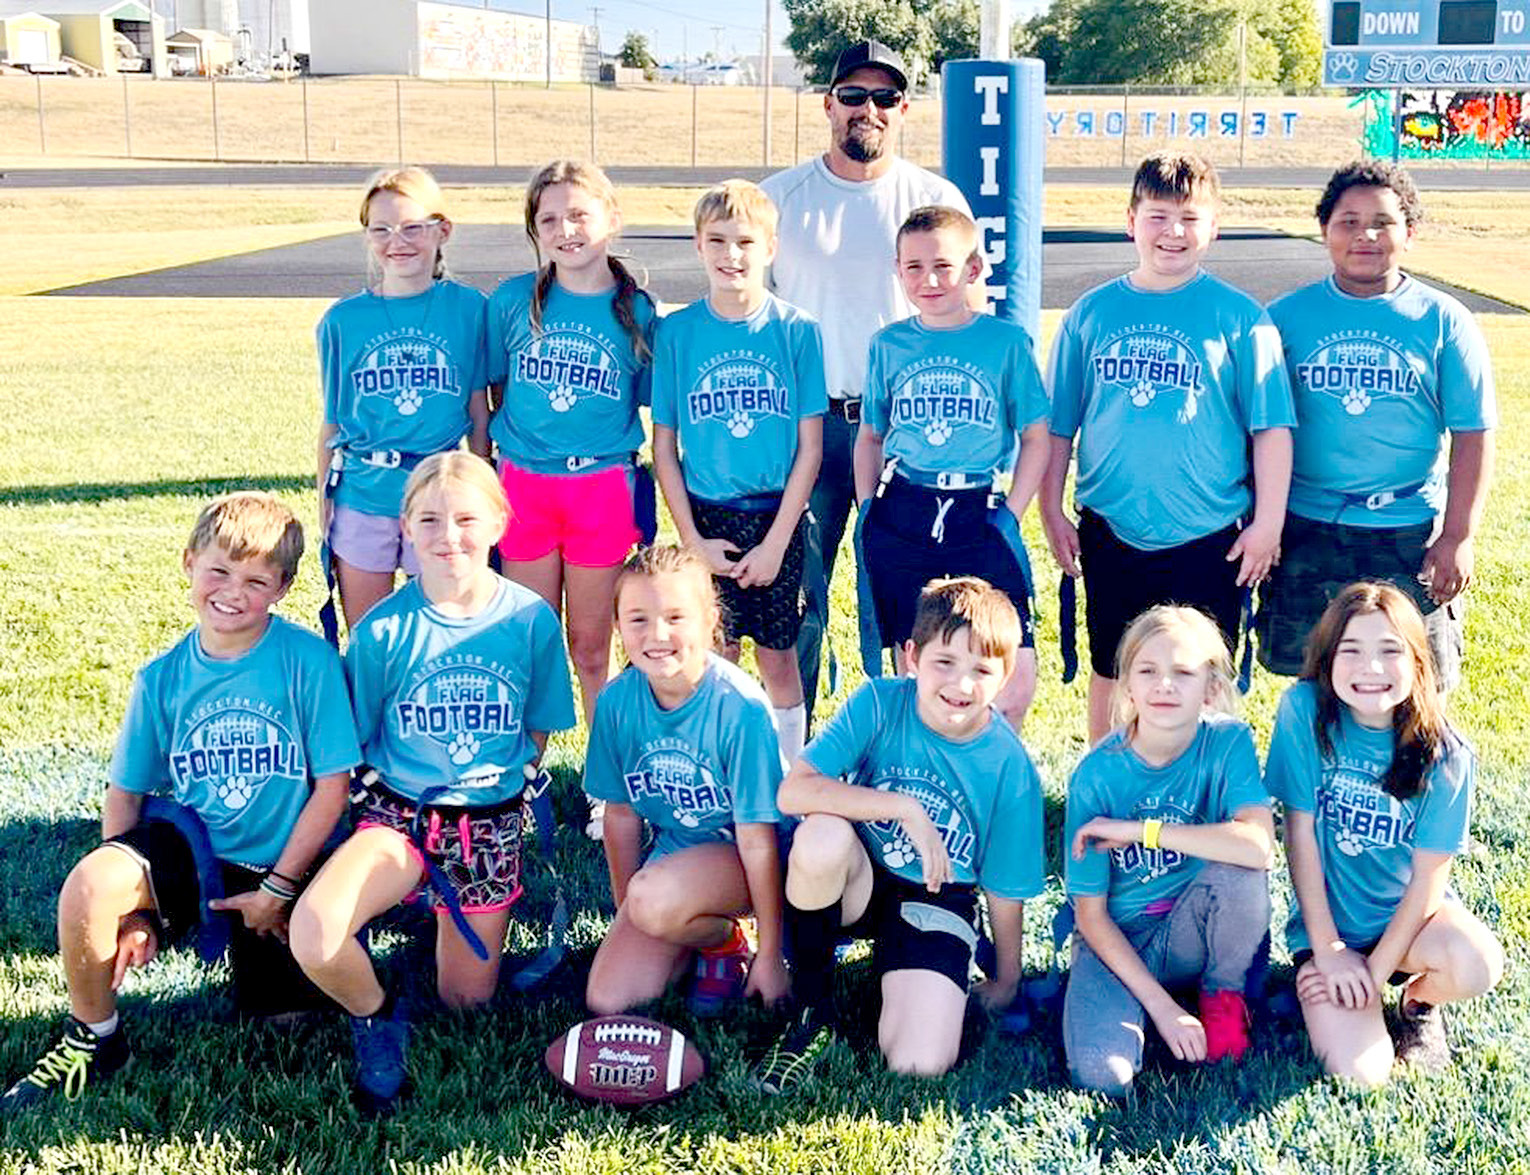 PARTICIPATING in the fourth and fifth-grade Stockton Recreation Flag Football this season were (front row, from left) Cohen Muir, Joree Dibble, Cambry Glendening, Levi Holsinger, Alexandria Eck, Madelyn Swaney; (middle row) Evelynn Hilbrink, Ava Armstrong, Henry Berkley, Hudson Saaranen, LJ Kibbee, Kaiden Fast; (back row) and coach Heath Muir. (Missing from the picture are Emery Peterson and coach Clint Armstrong.